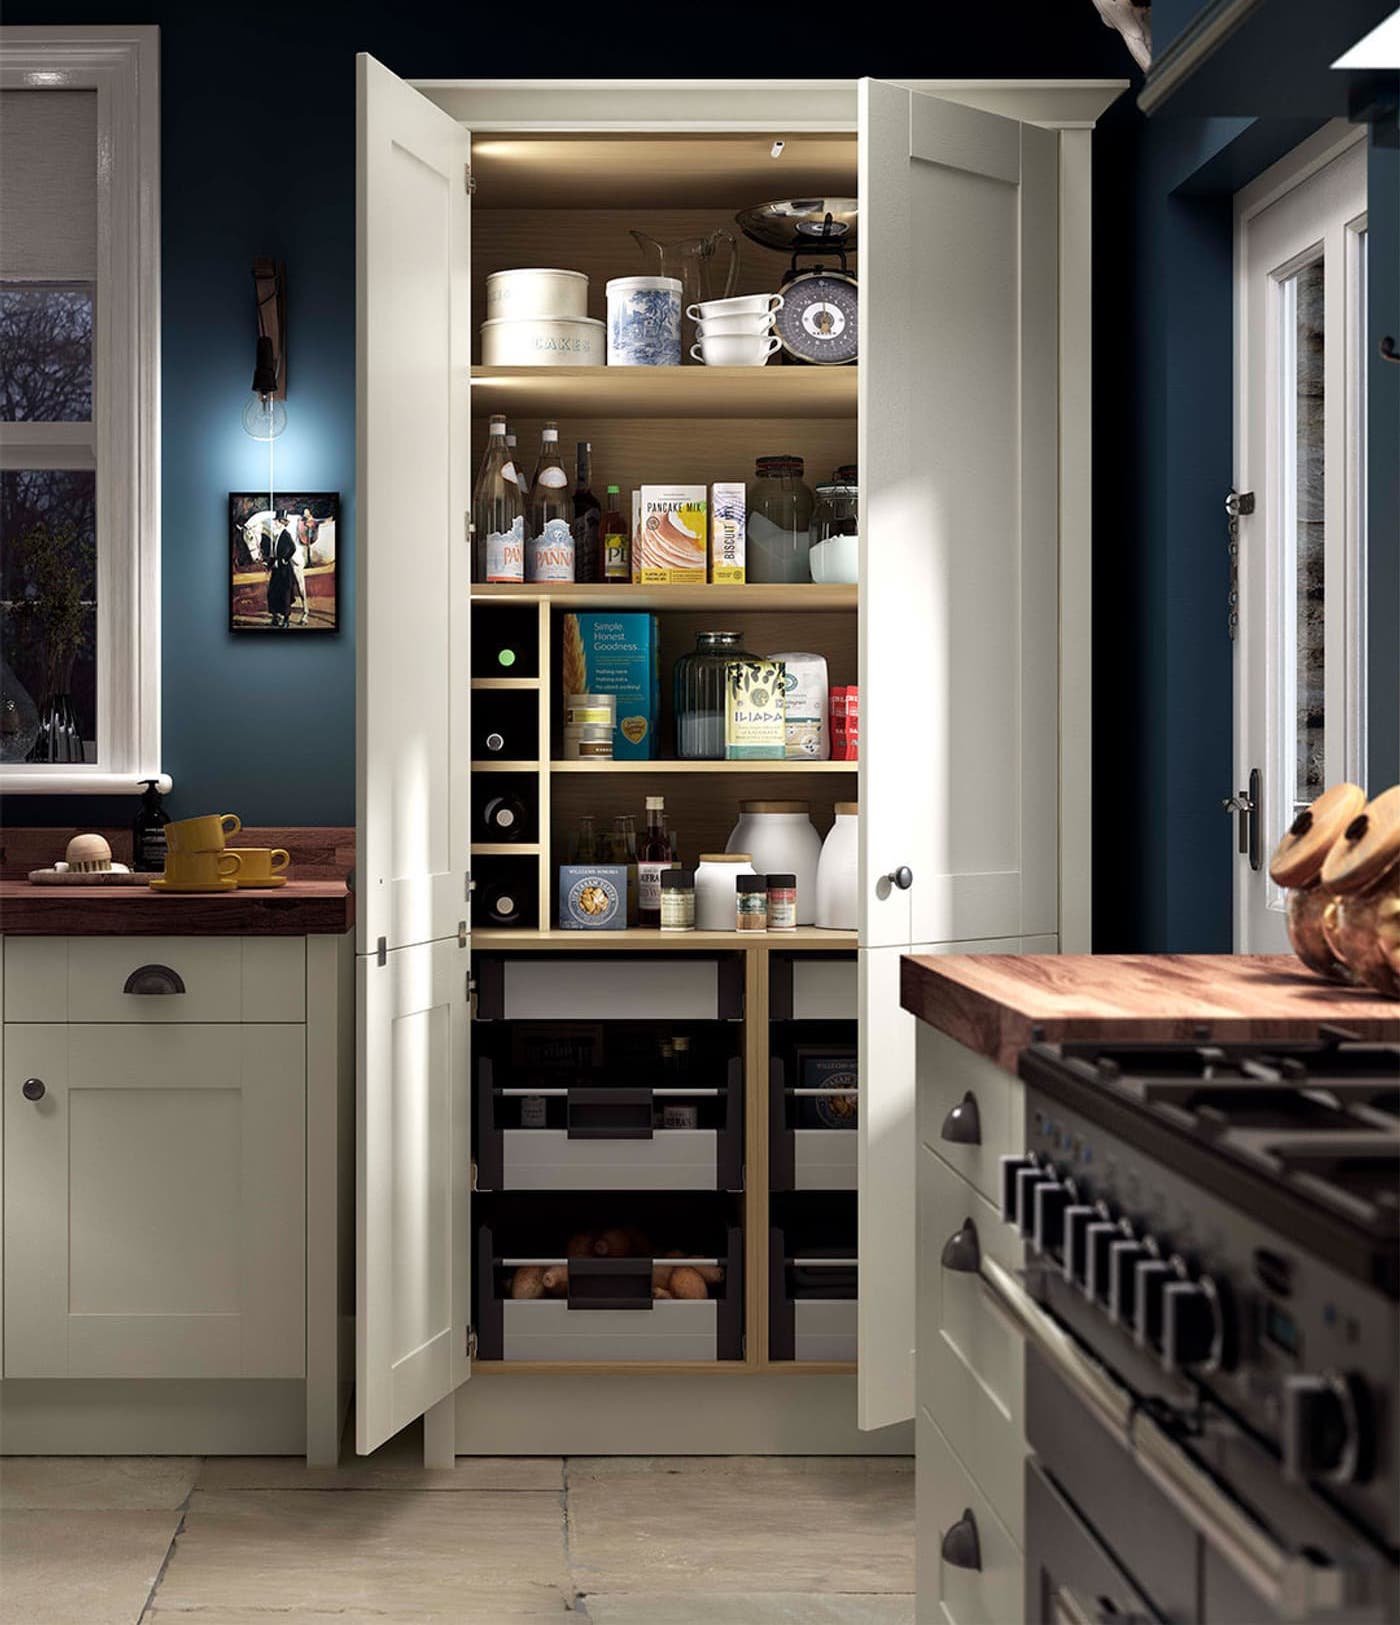 Looking for a Wickes price list? We explain Wickes kitchen prices ...